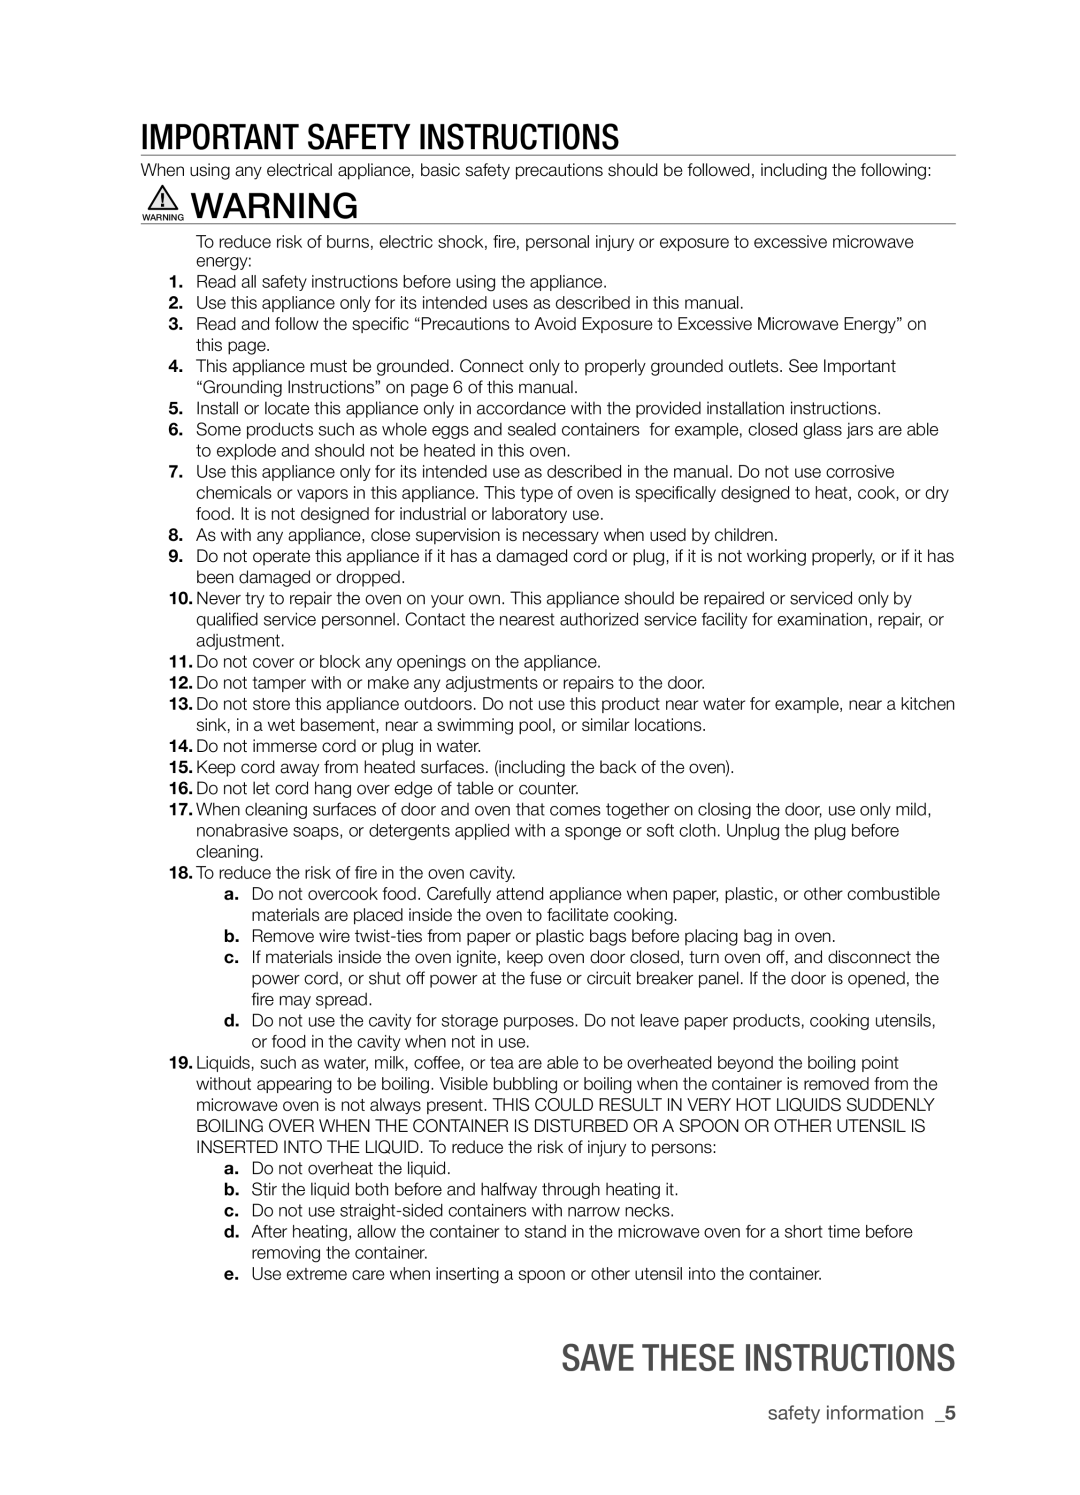 Samsung SMH8165STG user manual Important Safety Instructions, Save these instructions, safety information 